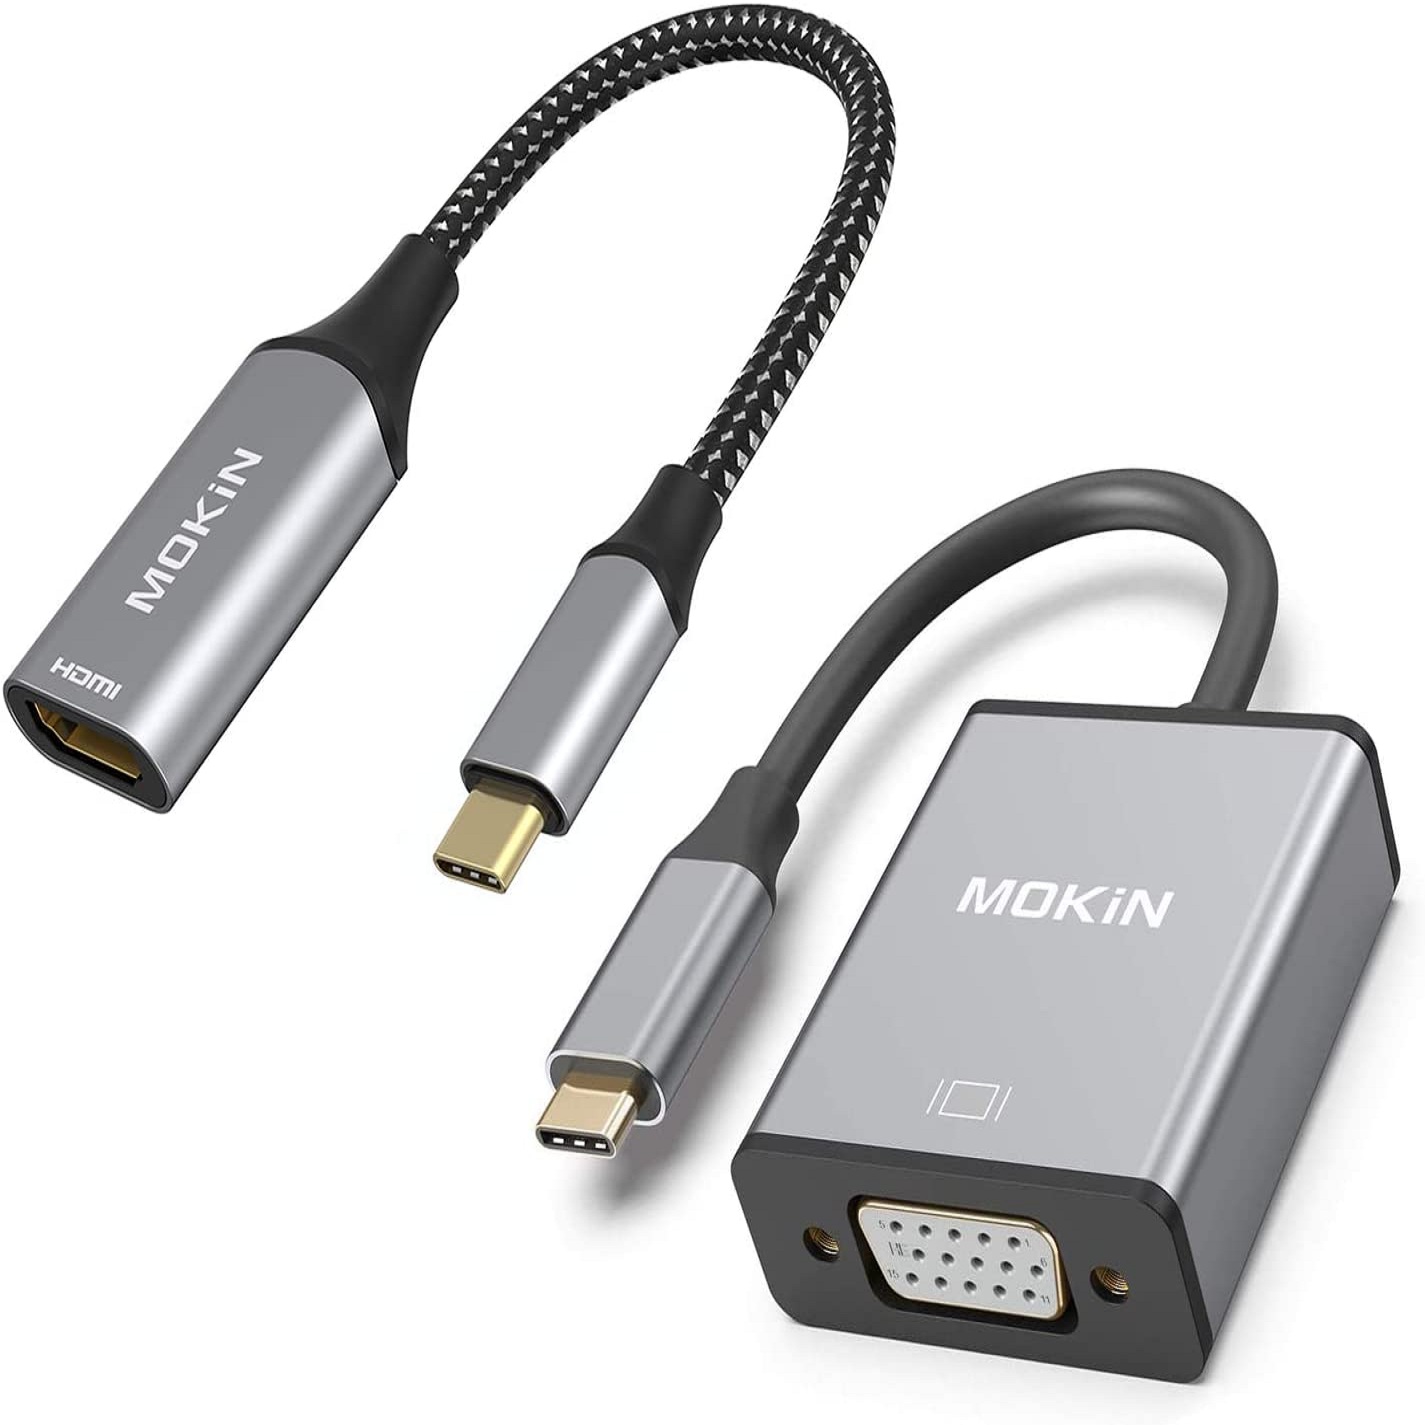 USB C to HDMI and USB C to VGA Adapter